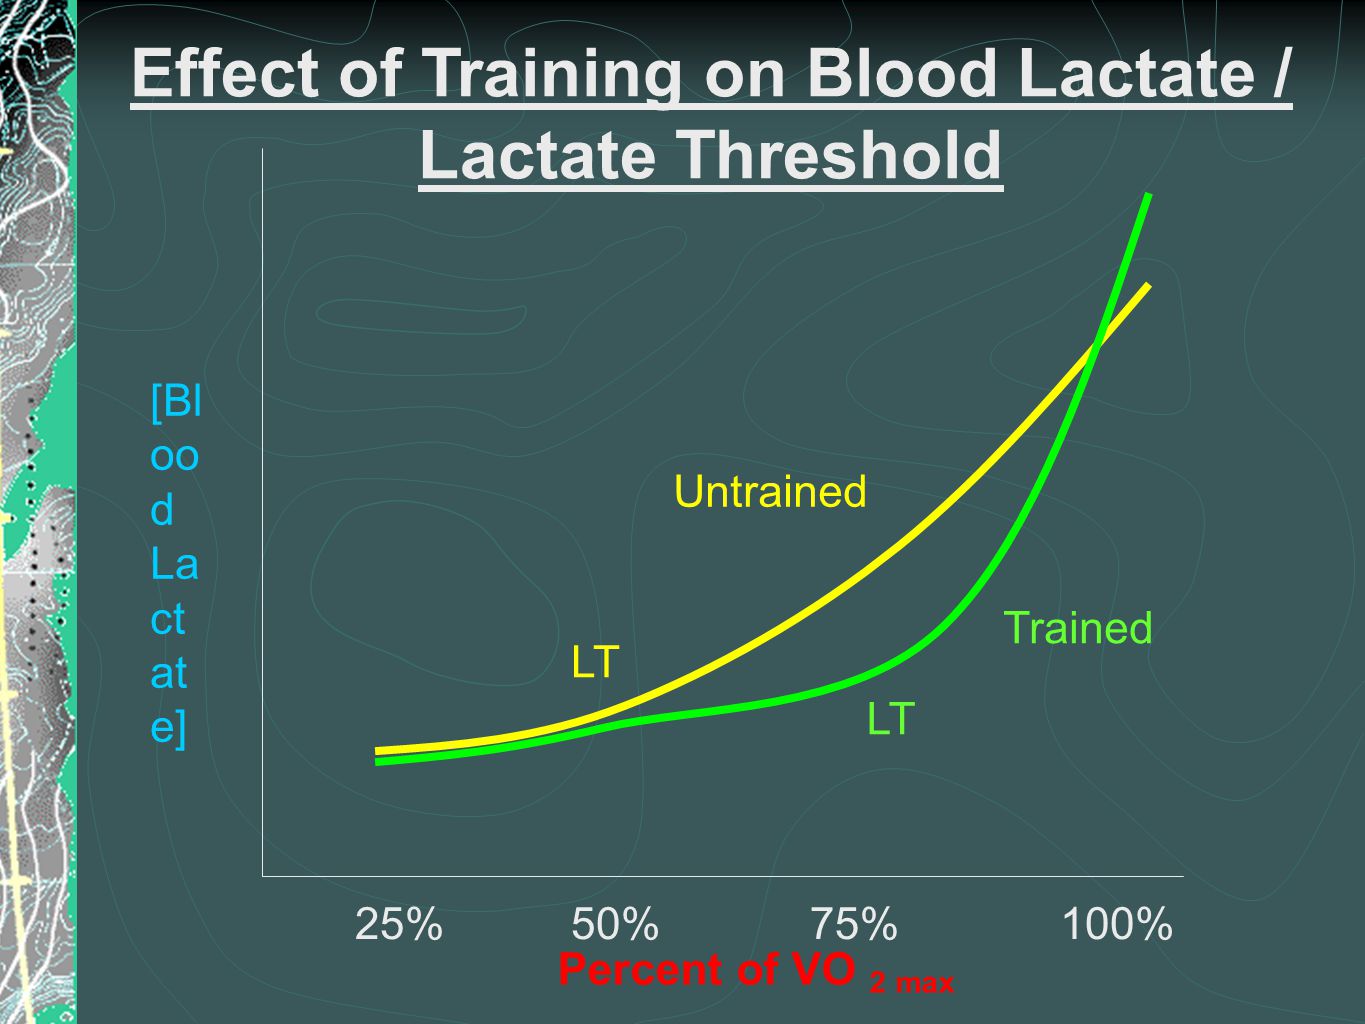 Percent of VO 2 max 25%50%75%100% [Bl oo d La ct at e] Untrained Trained Effect of Training on Blood Lactate / Lactate Threshold LT